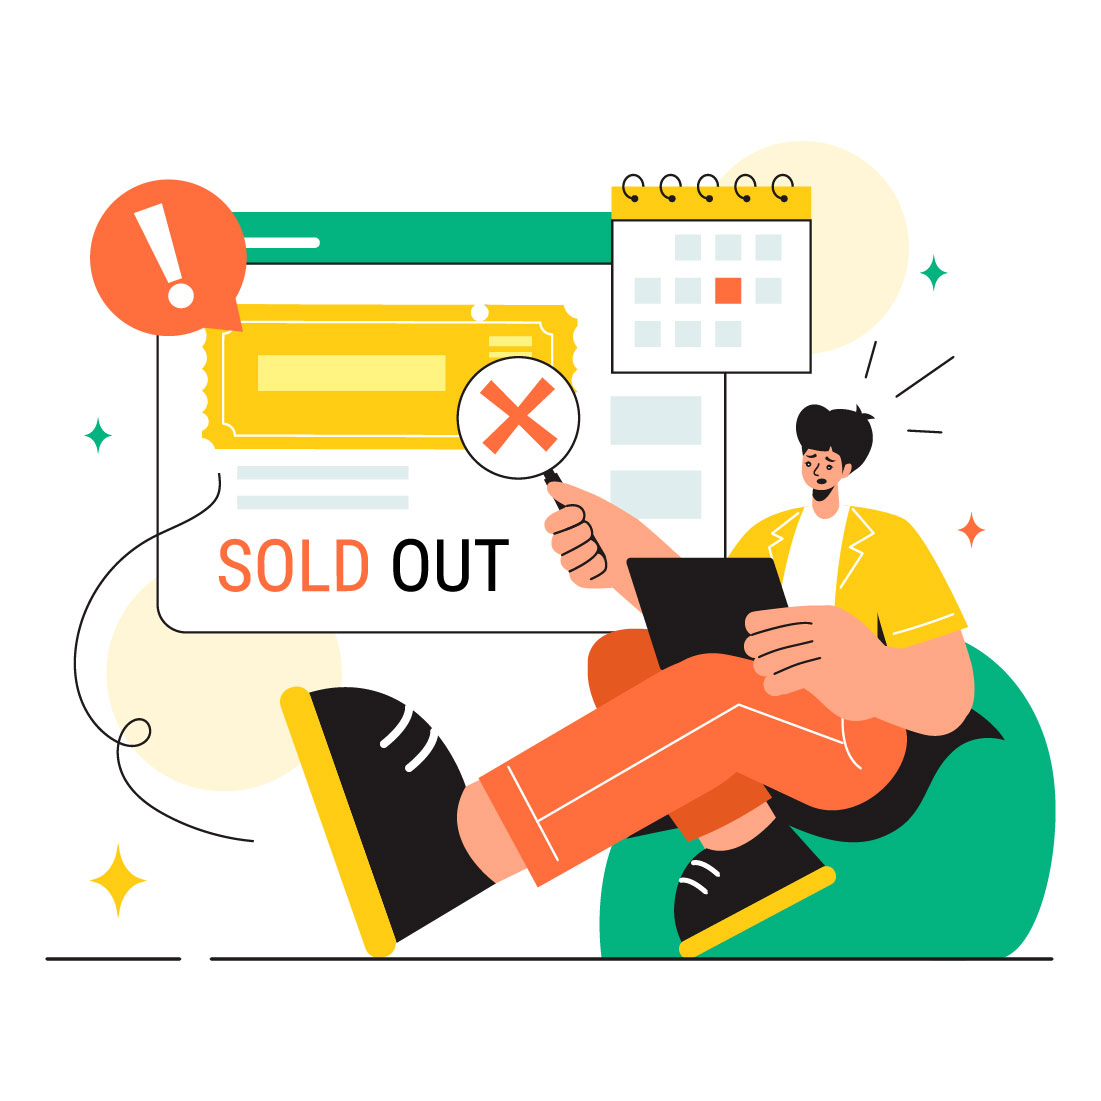 13 Sold Out Vector Illustration cover image.